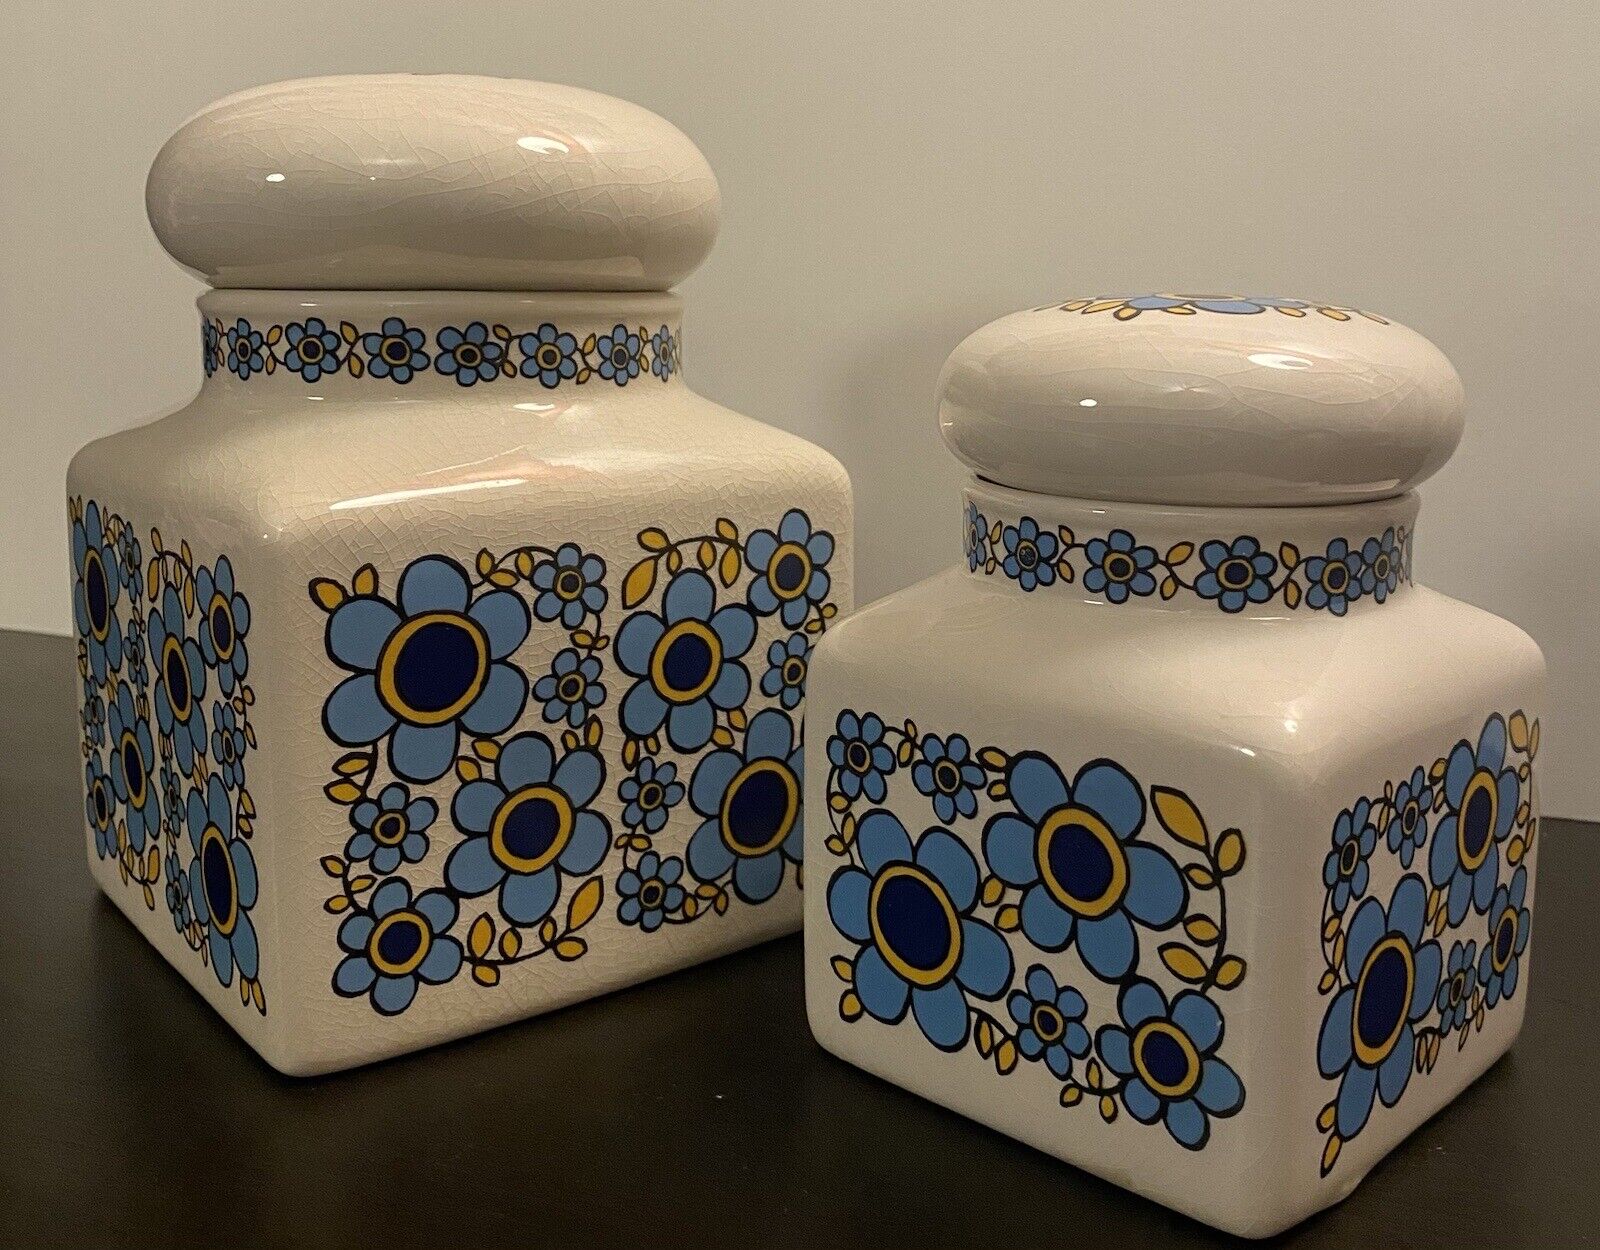 2 Vintage Taunton Vale Pottery Canisters Blue & Yellow Floral Retro 60s Sm & Lg